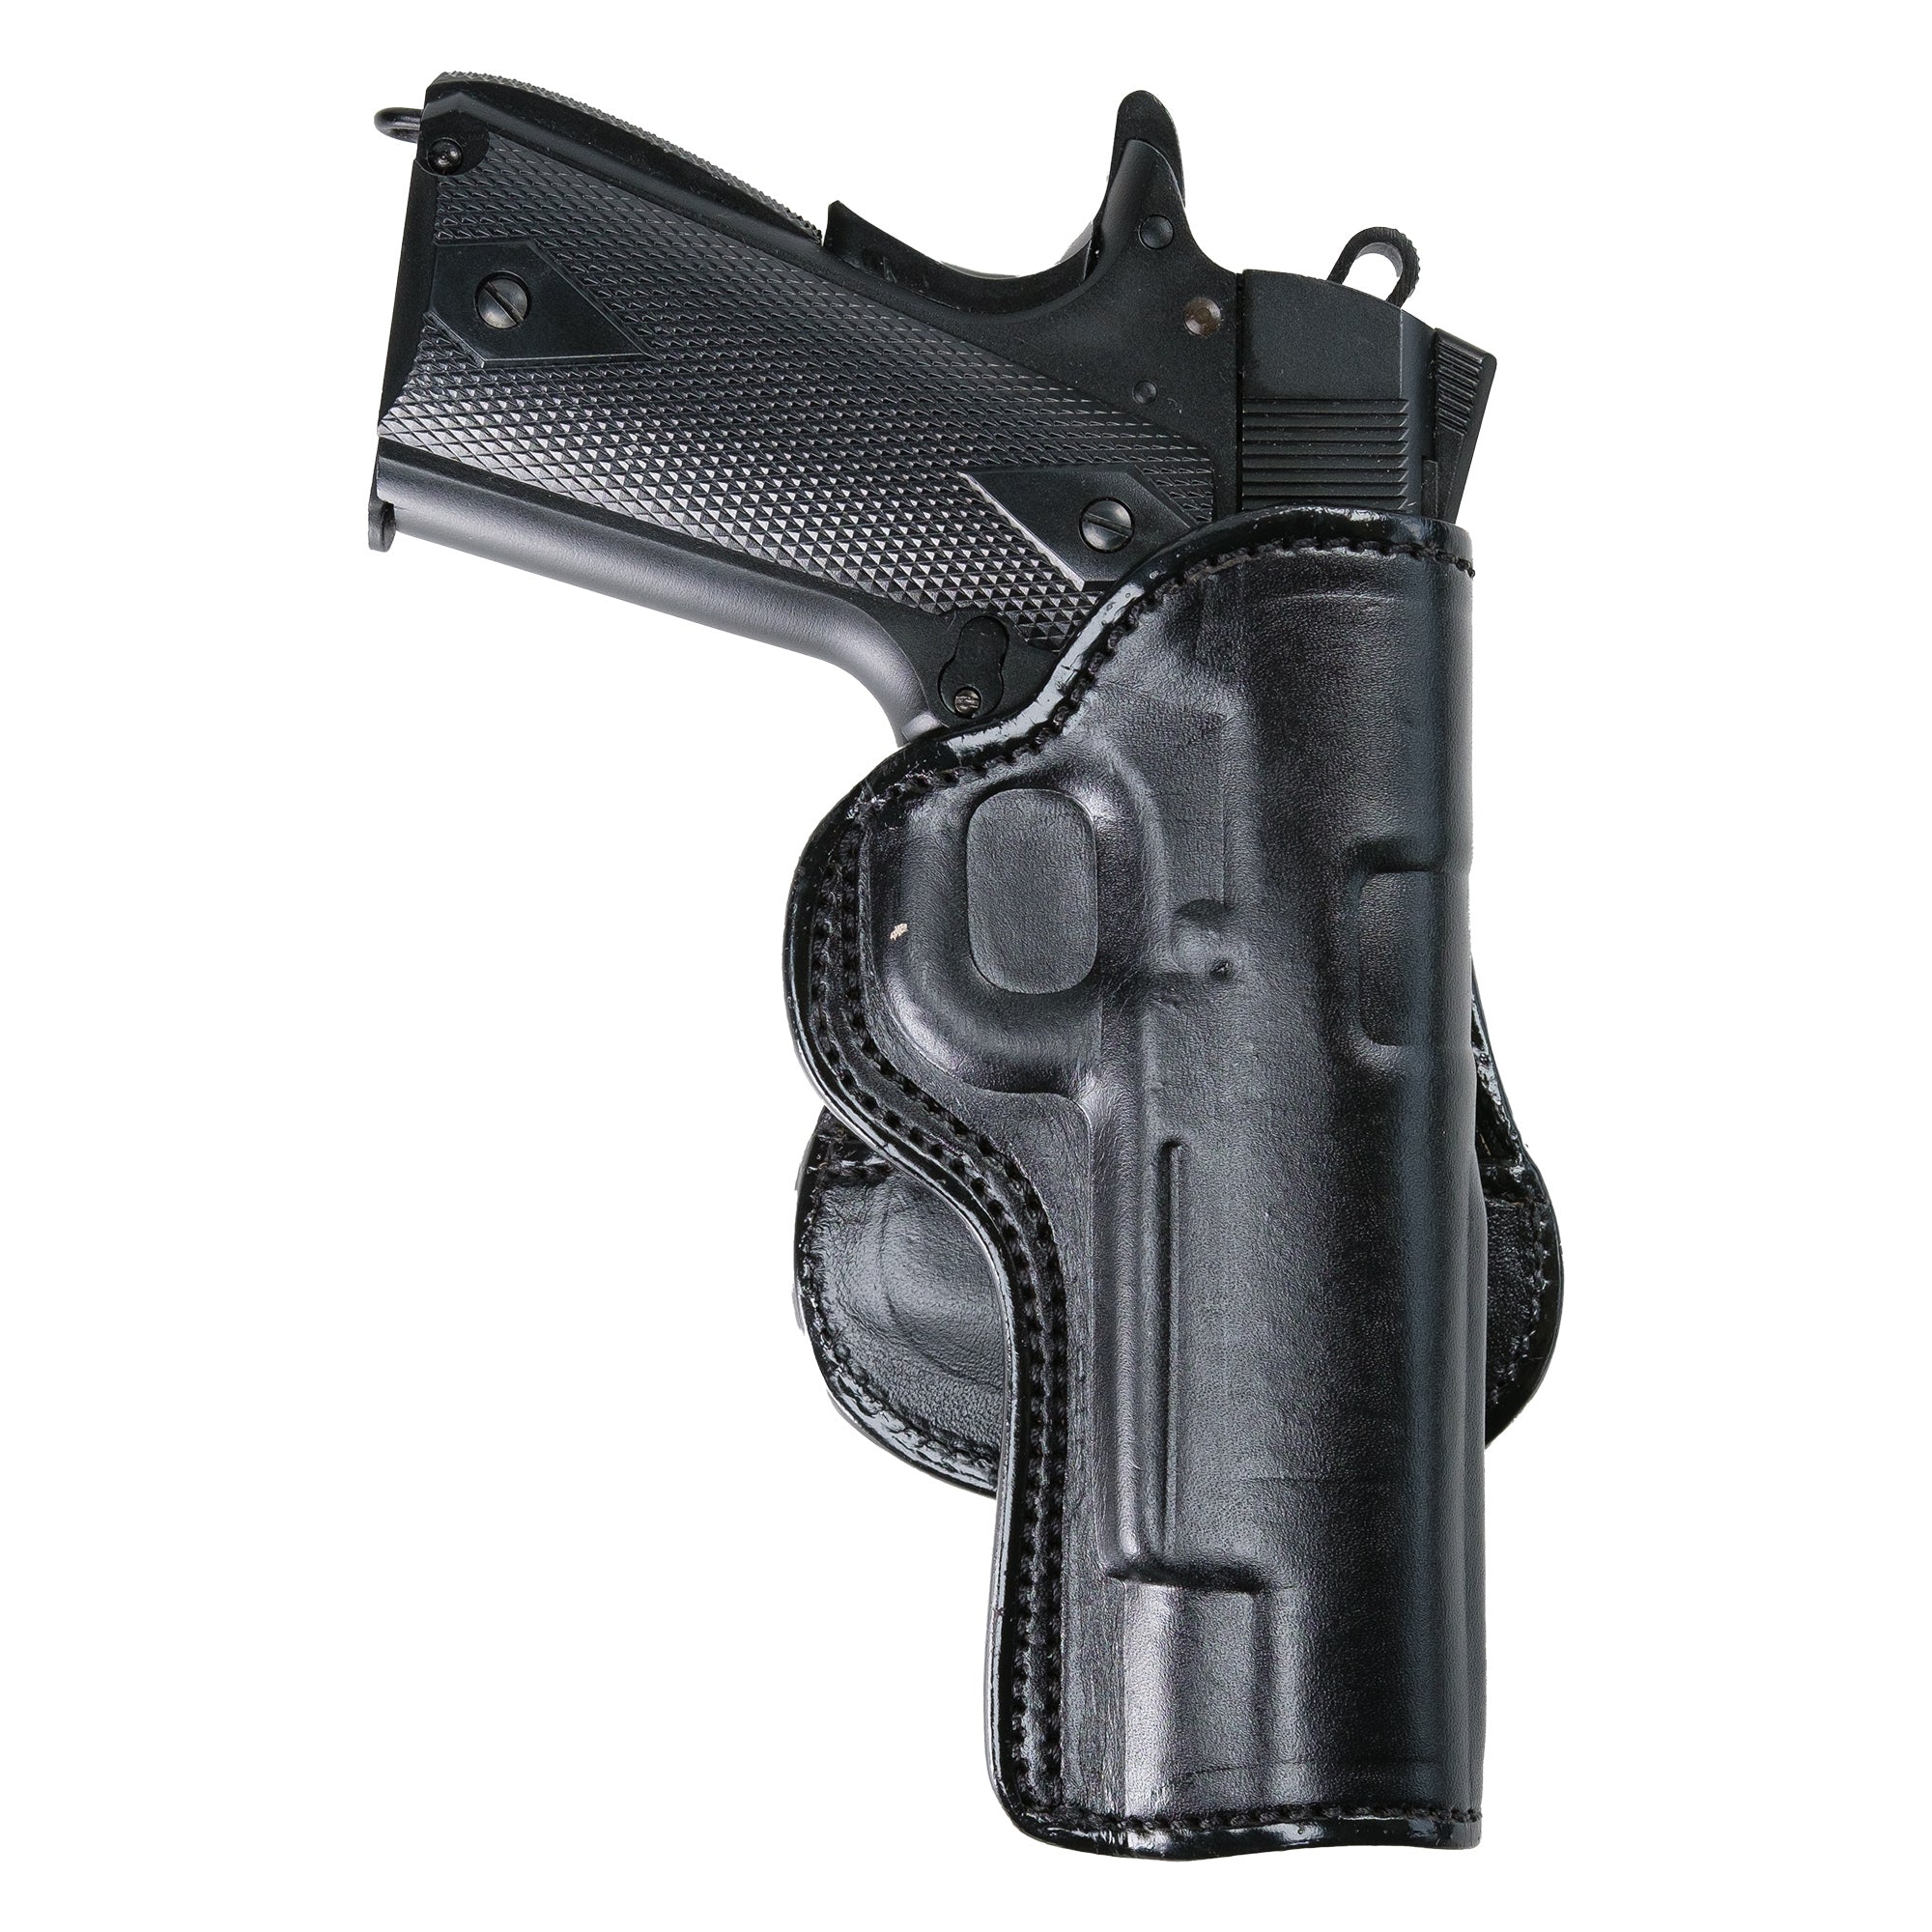 PD - Paddle Leather OWB Gun Holster